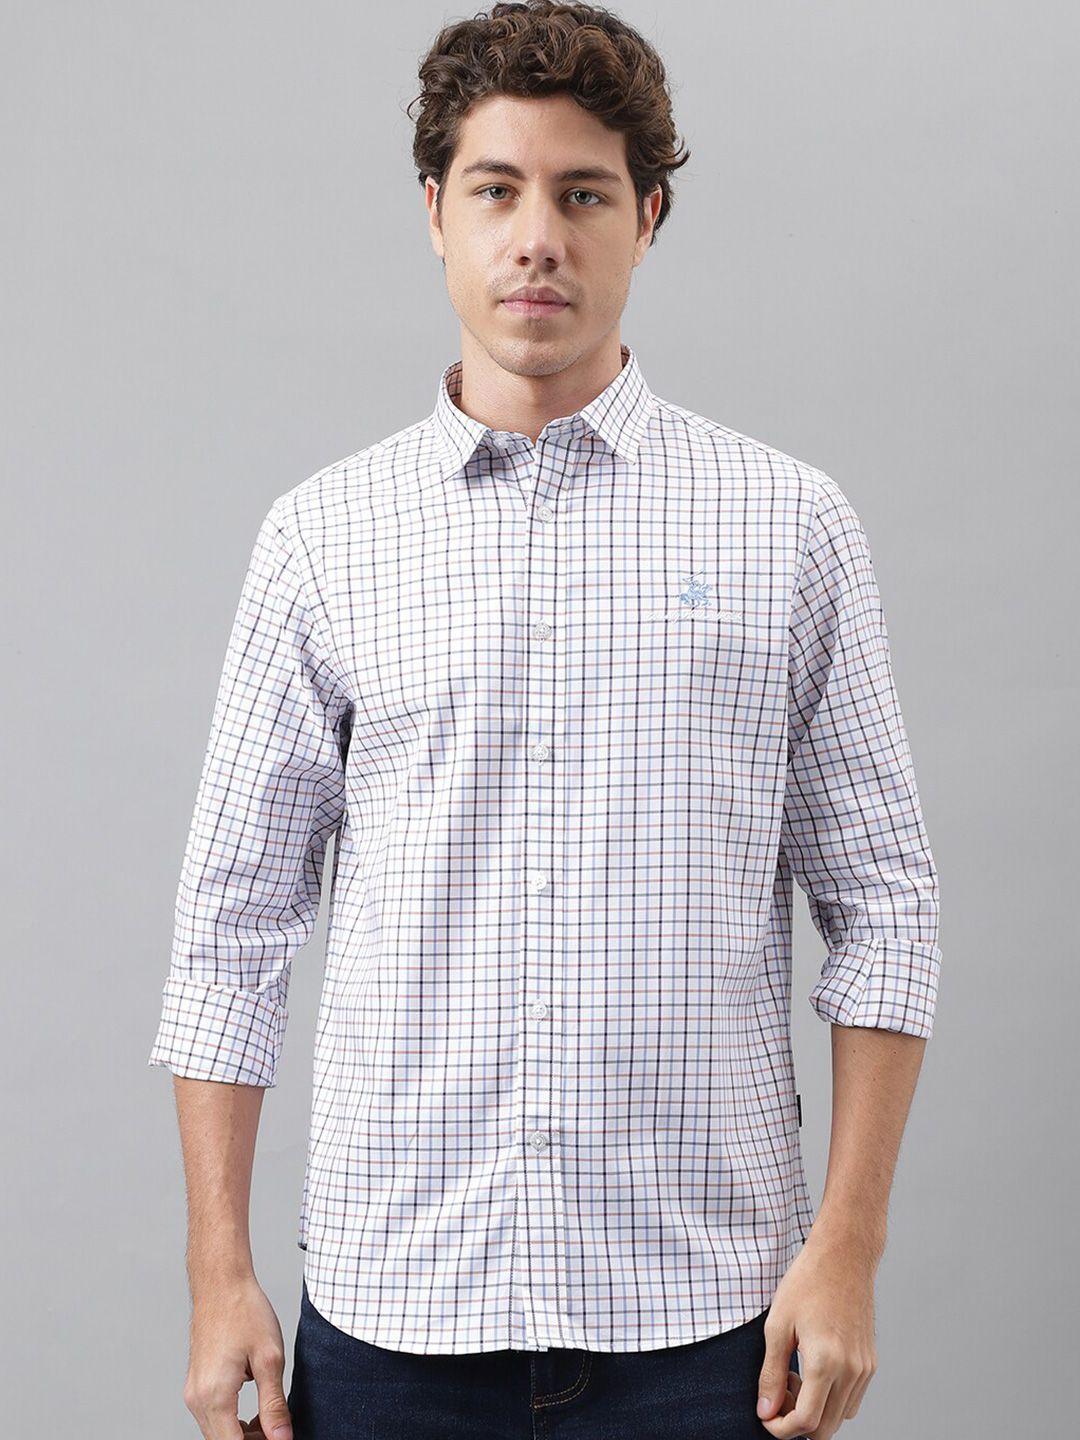 beverly hills polo club grid tattersall checks spread collar pure cotton casual shirt